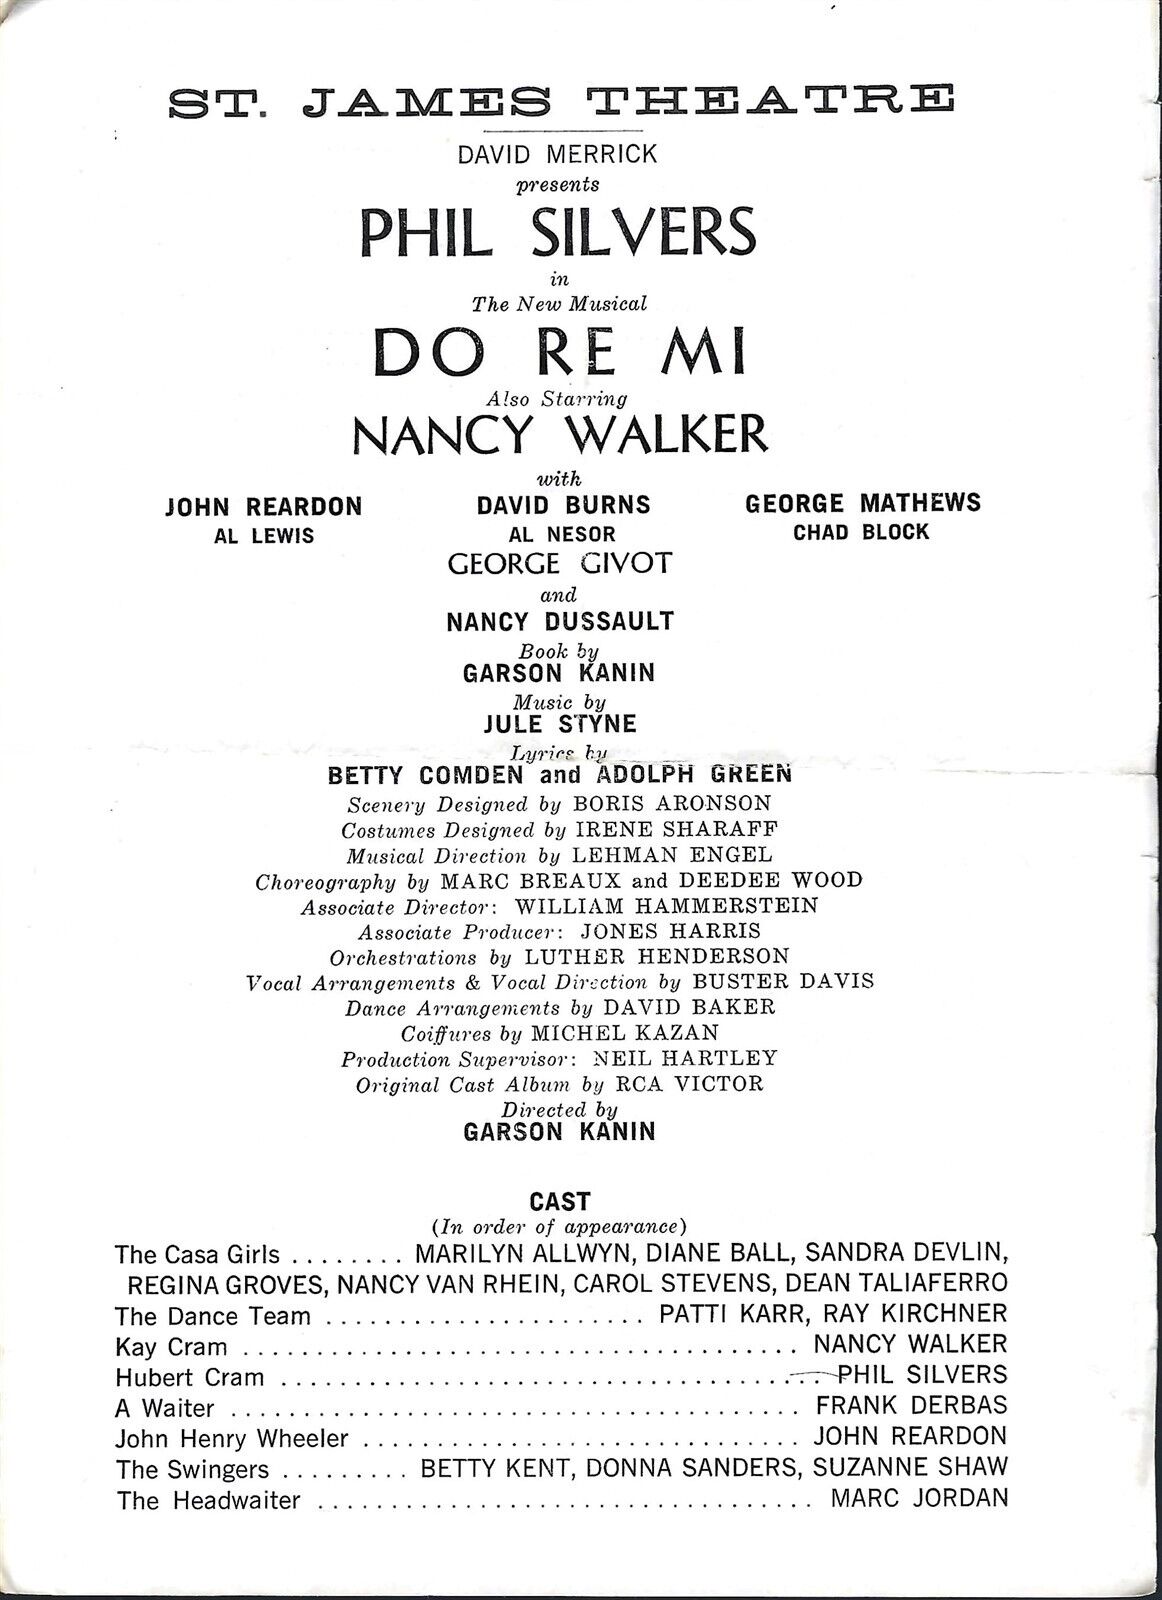 Do Re Mi Preview Playbill, Phil Silvers, Nancy Walker, Dussault, Givot, Nyc 1960